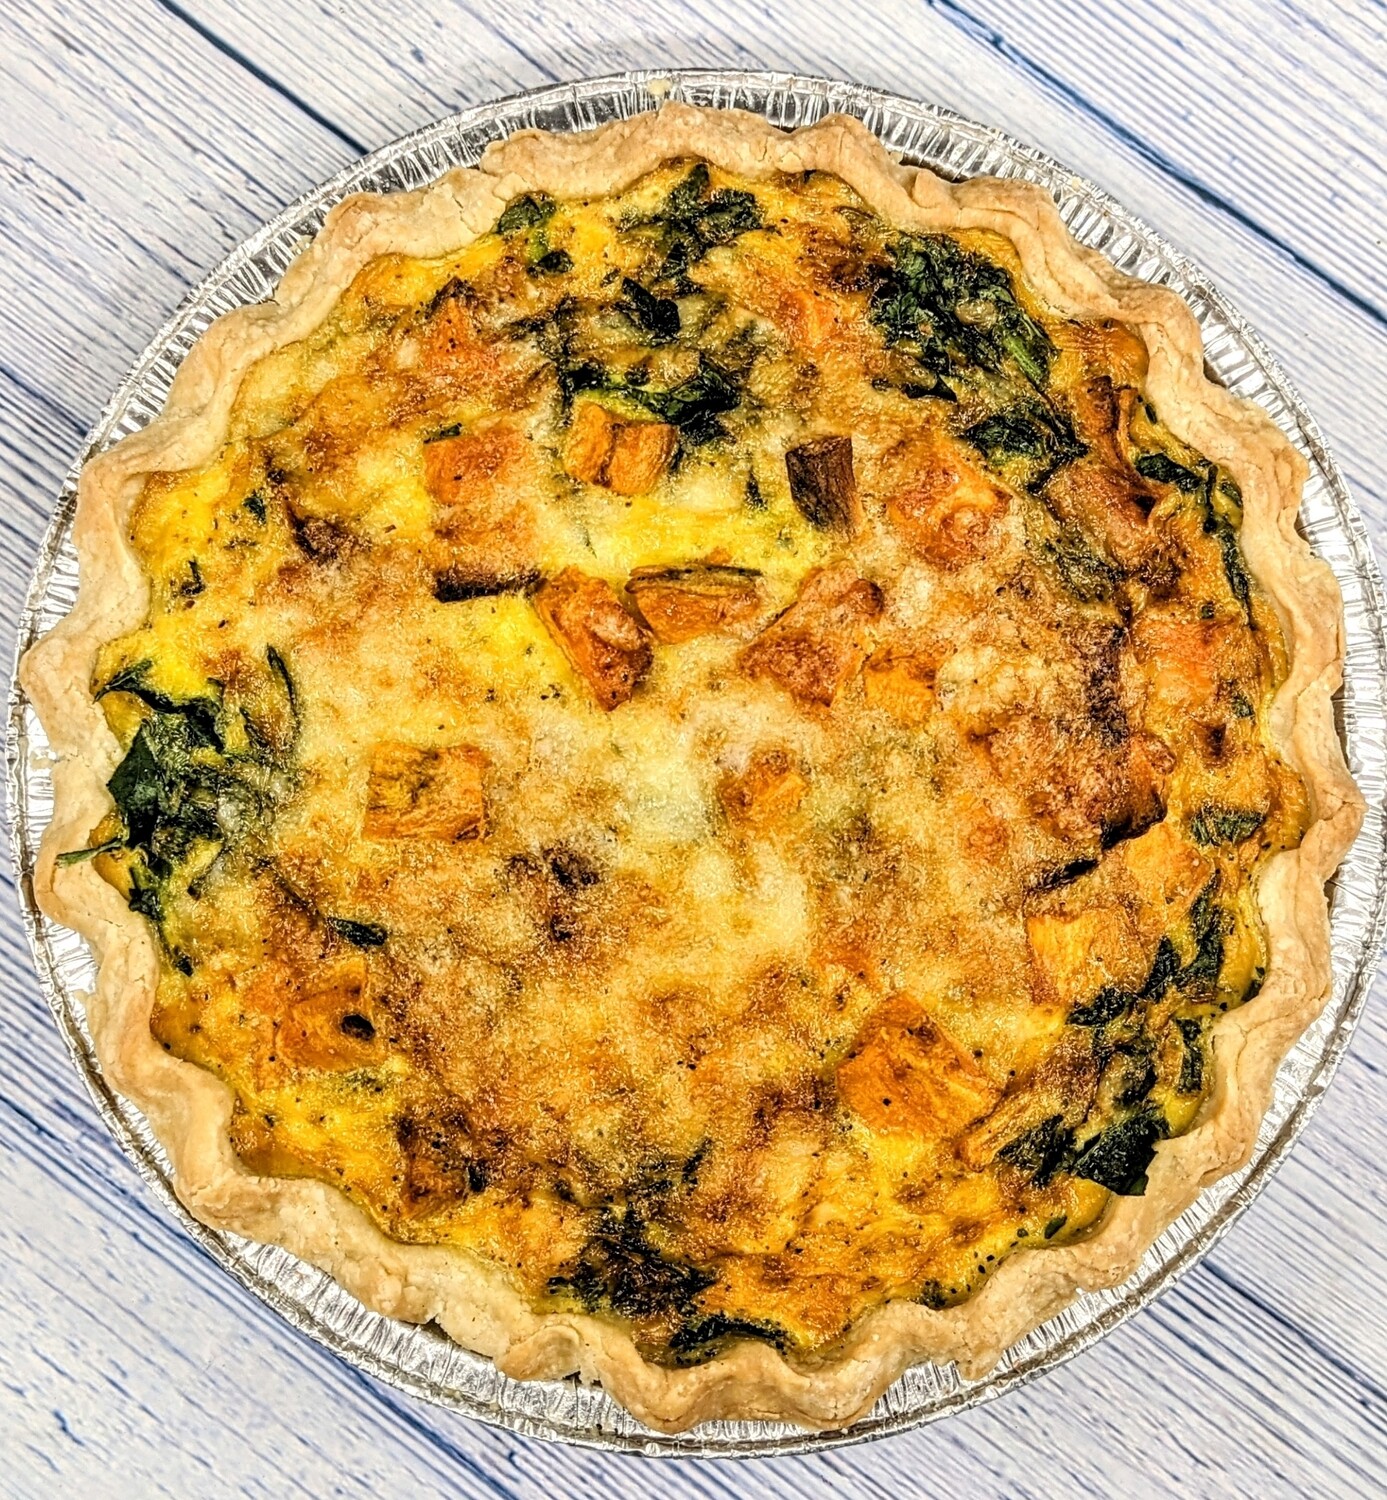 Spinach, sweet potato, and caramelized onion quiche - Pasture Raised Eggs